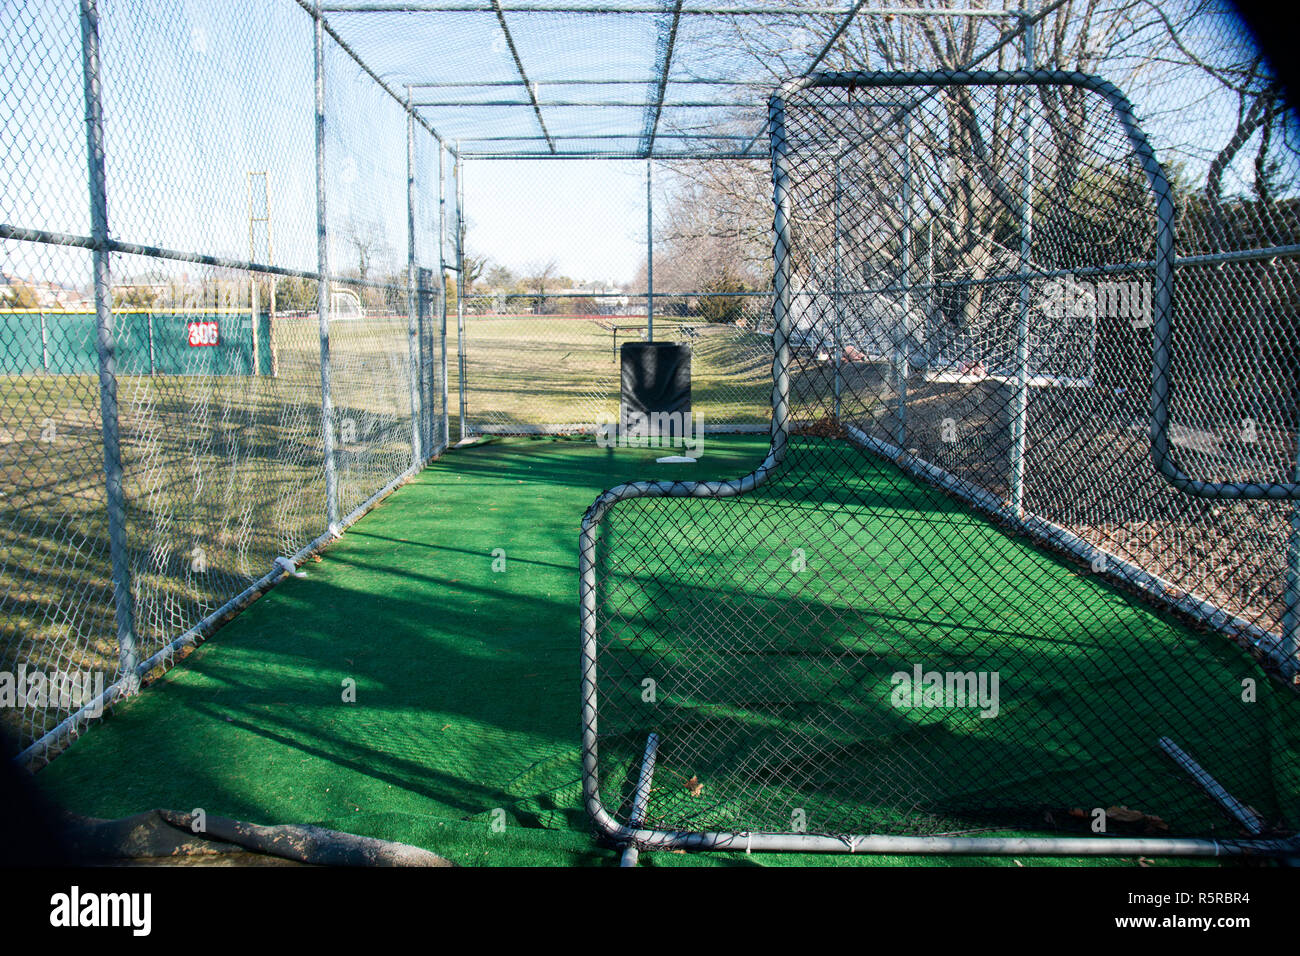 A local high schools batting cage from behind the pitchers safety screen Stock Photo